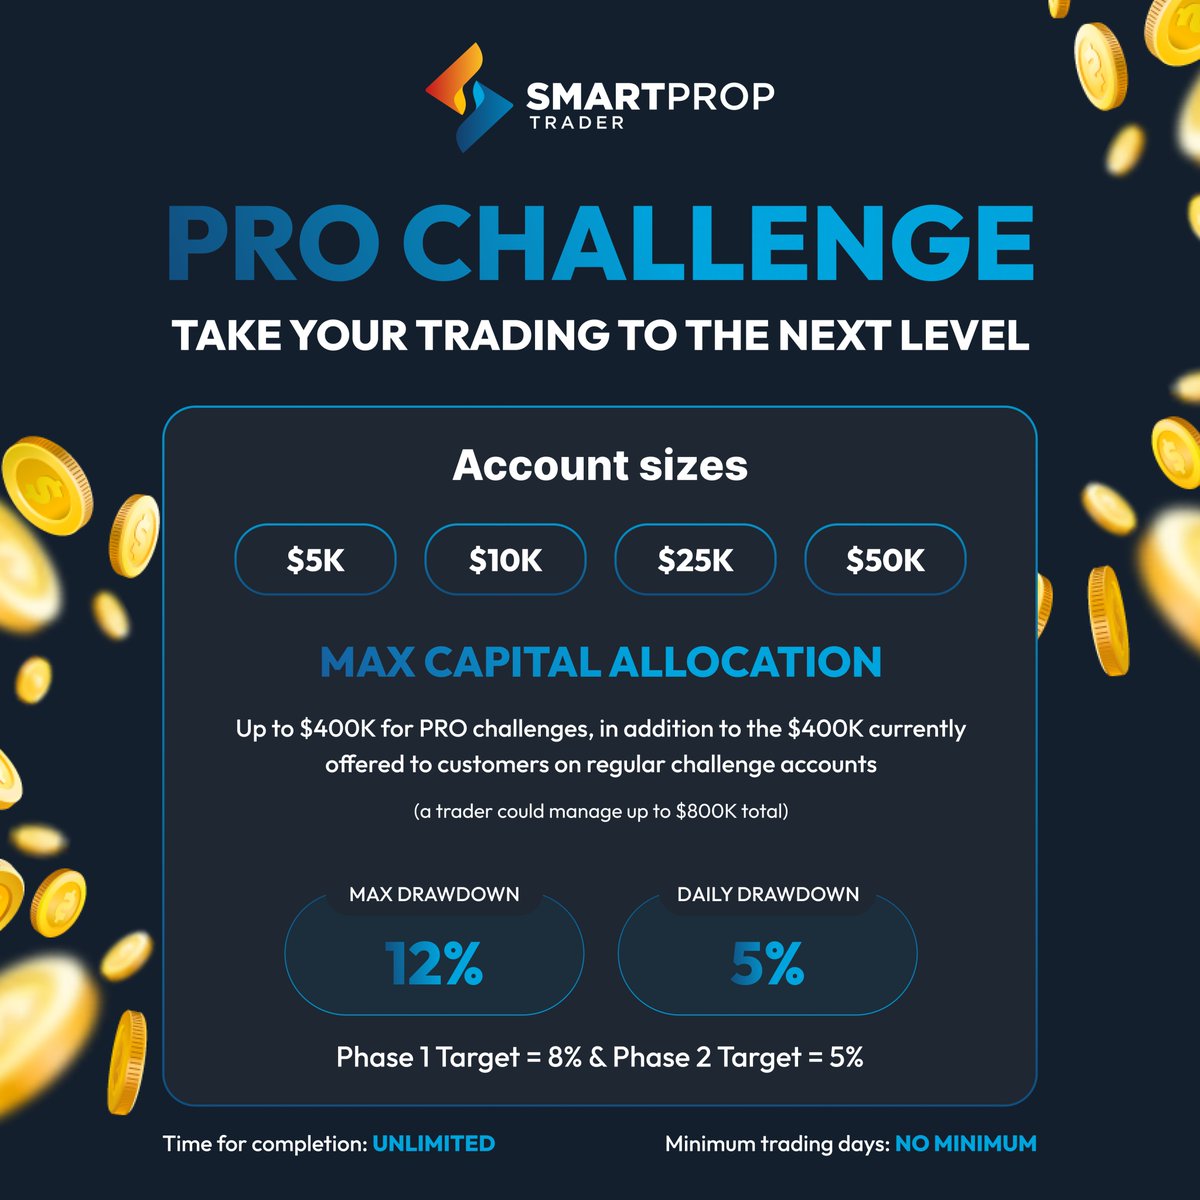 SPT PRO CHALLENGE GIVEAWAY TIME!! I will be awarding a new $50K Pro Challenge to the trader who crafts the best video testimonial for SPT's website. To enter, visit the link below and submit an awesome video testimonial explaining why you love SPT. Winner will be selected 1